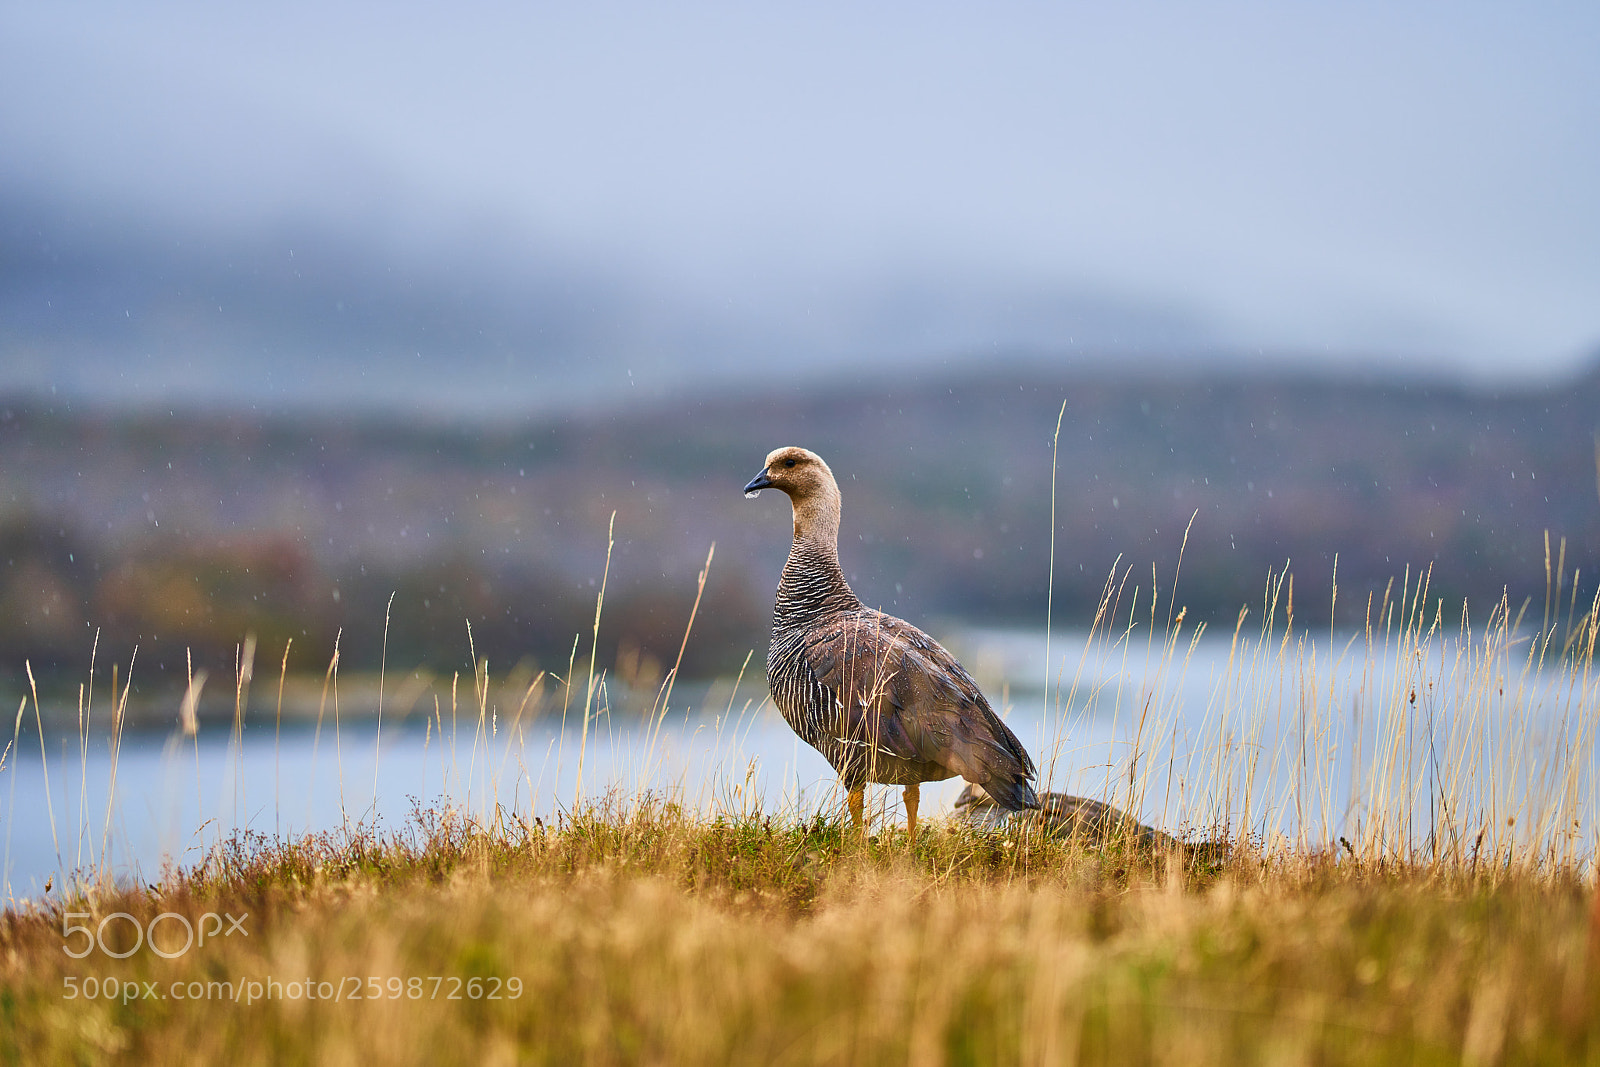 Sony a99 II sample photo. Magallanica bustard in the photography